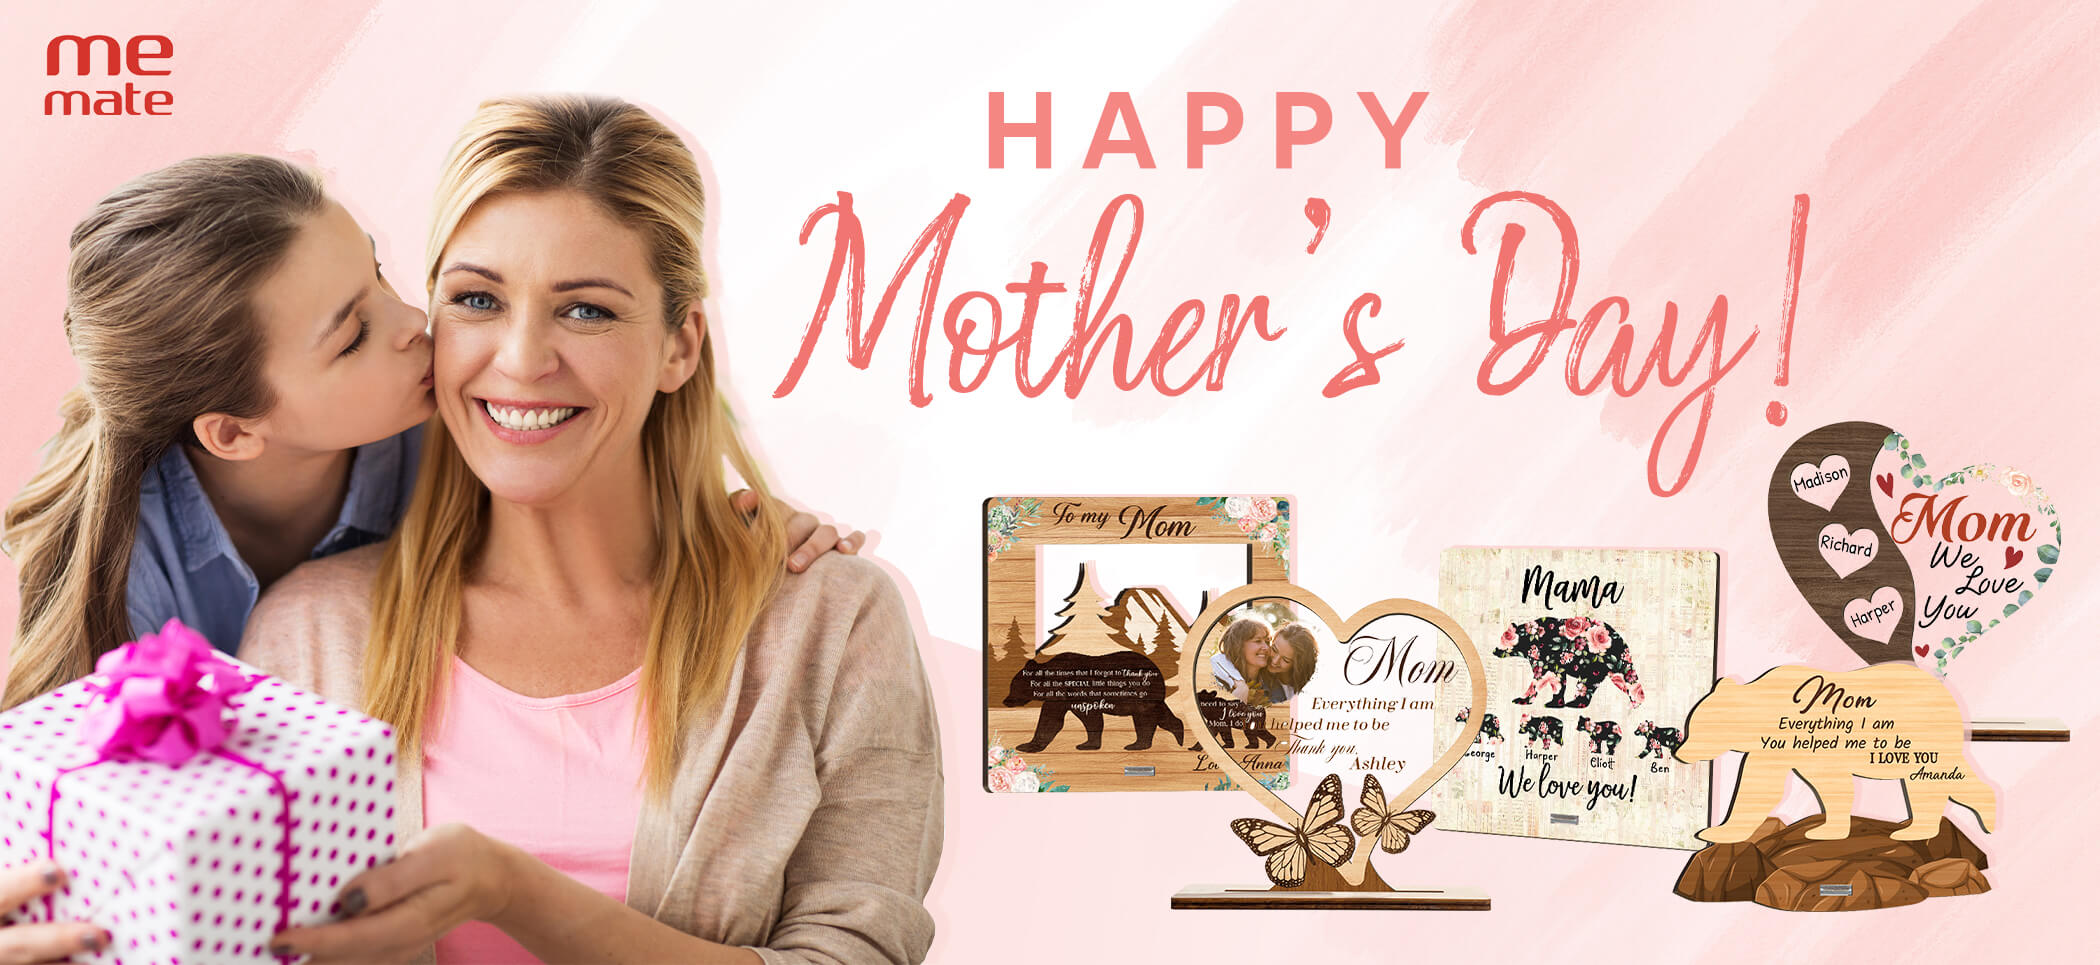 Banner memate Mothers day